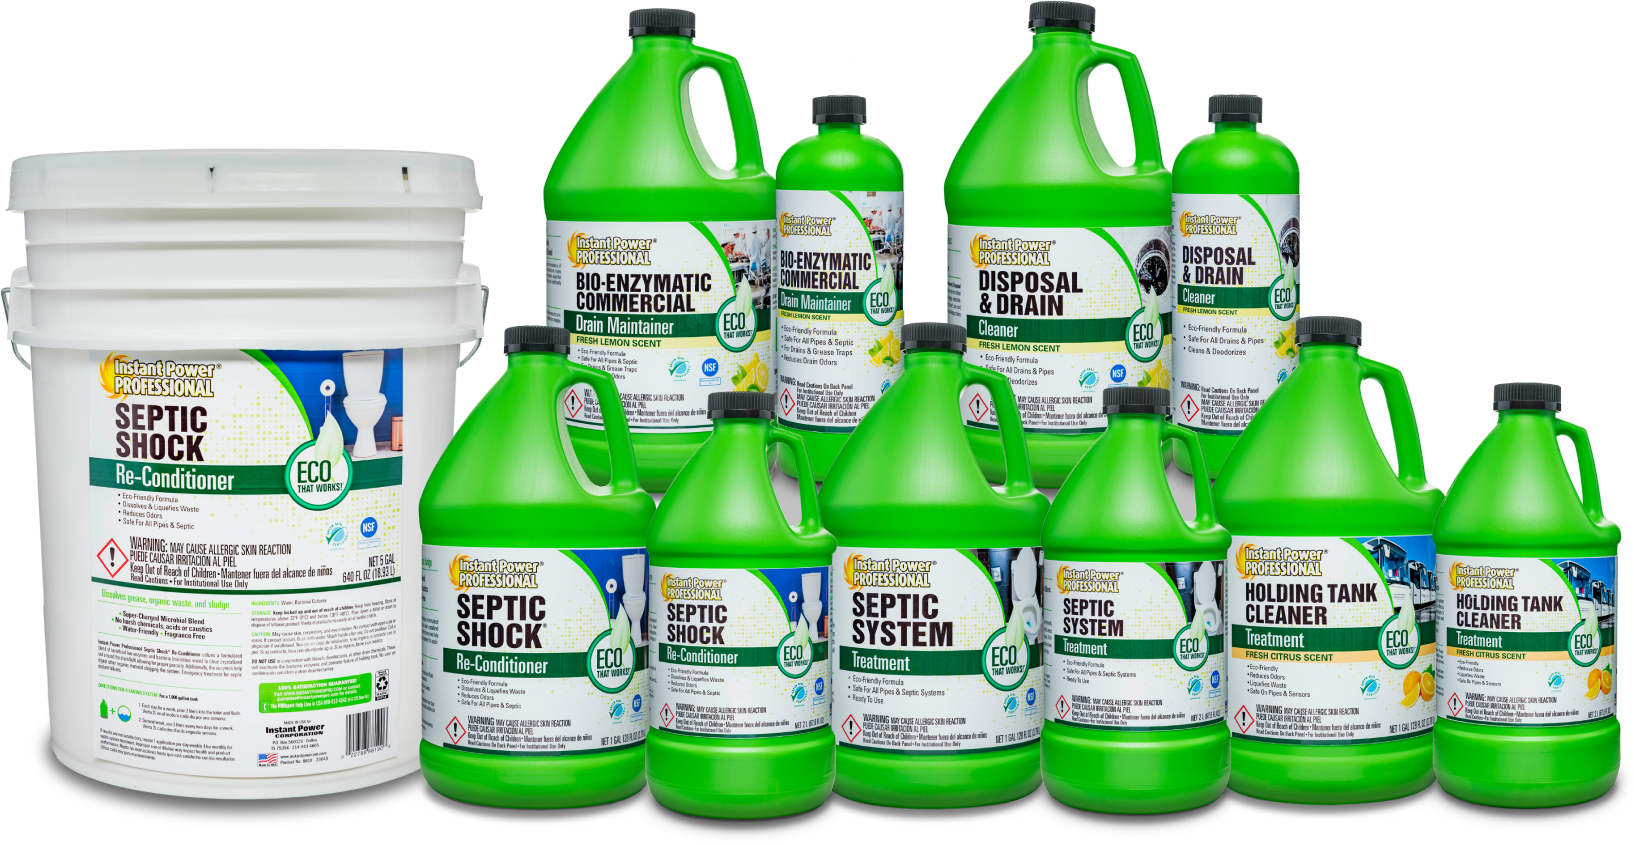 Best Professional Drain and Sewer Products | Instant Power® Pro - Green cleaning products, green cleaning supplies, environmentally-friendly cleaning products, commercial cleaning supplies companies, industrial cleaning supplies, janitorial cleaning, healthcare cleaning, education cleaning, retail cleaning, Green Sustainable Cleaning Products, eco friendly cleaning products - Instant Power Professional